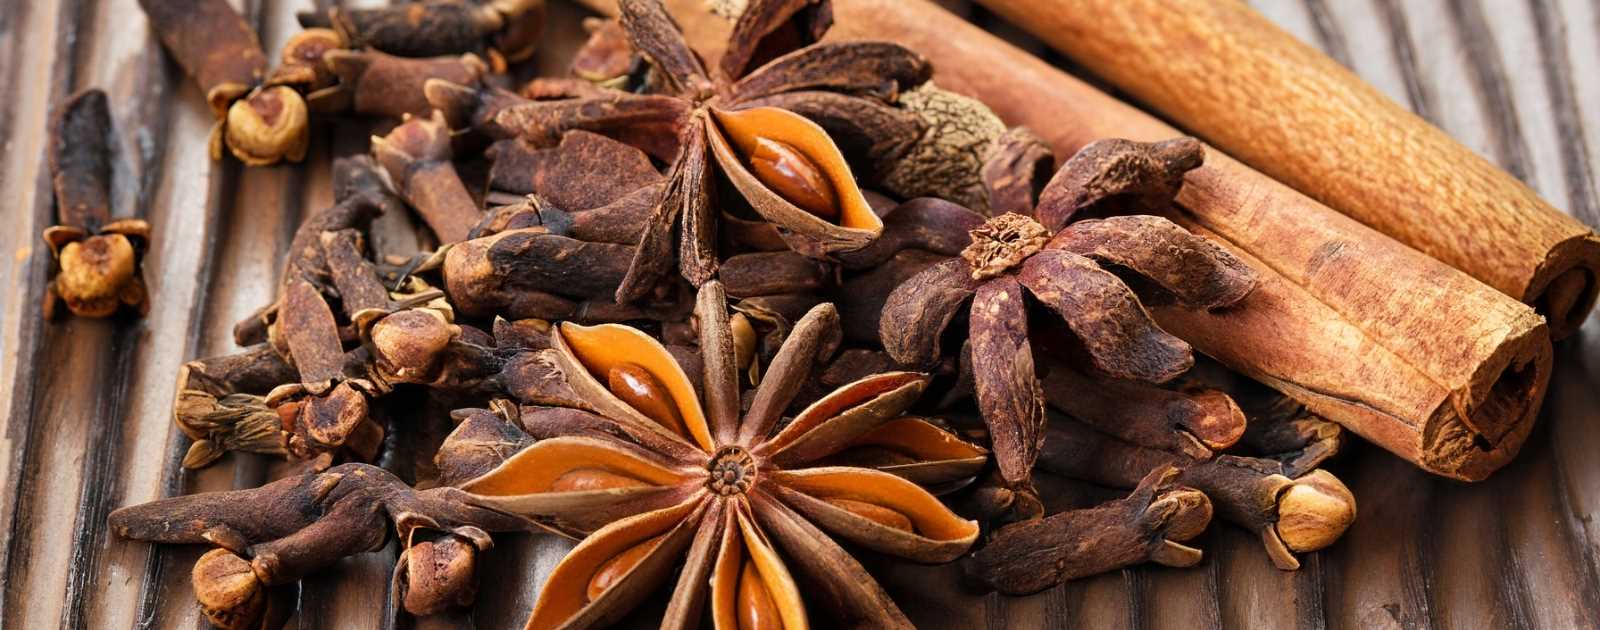 What Diseases Can Cloves Cure